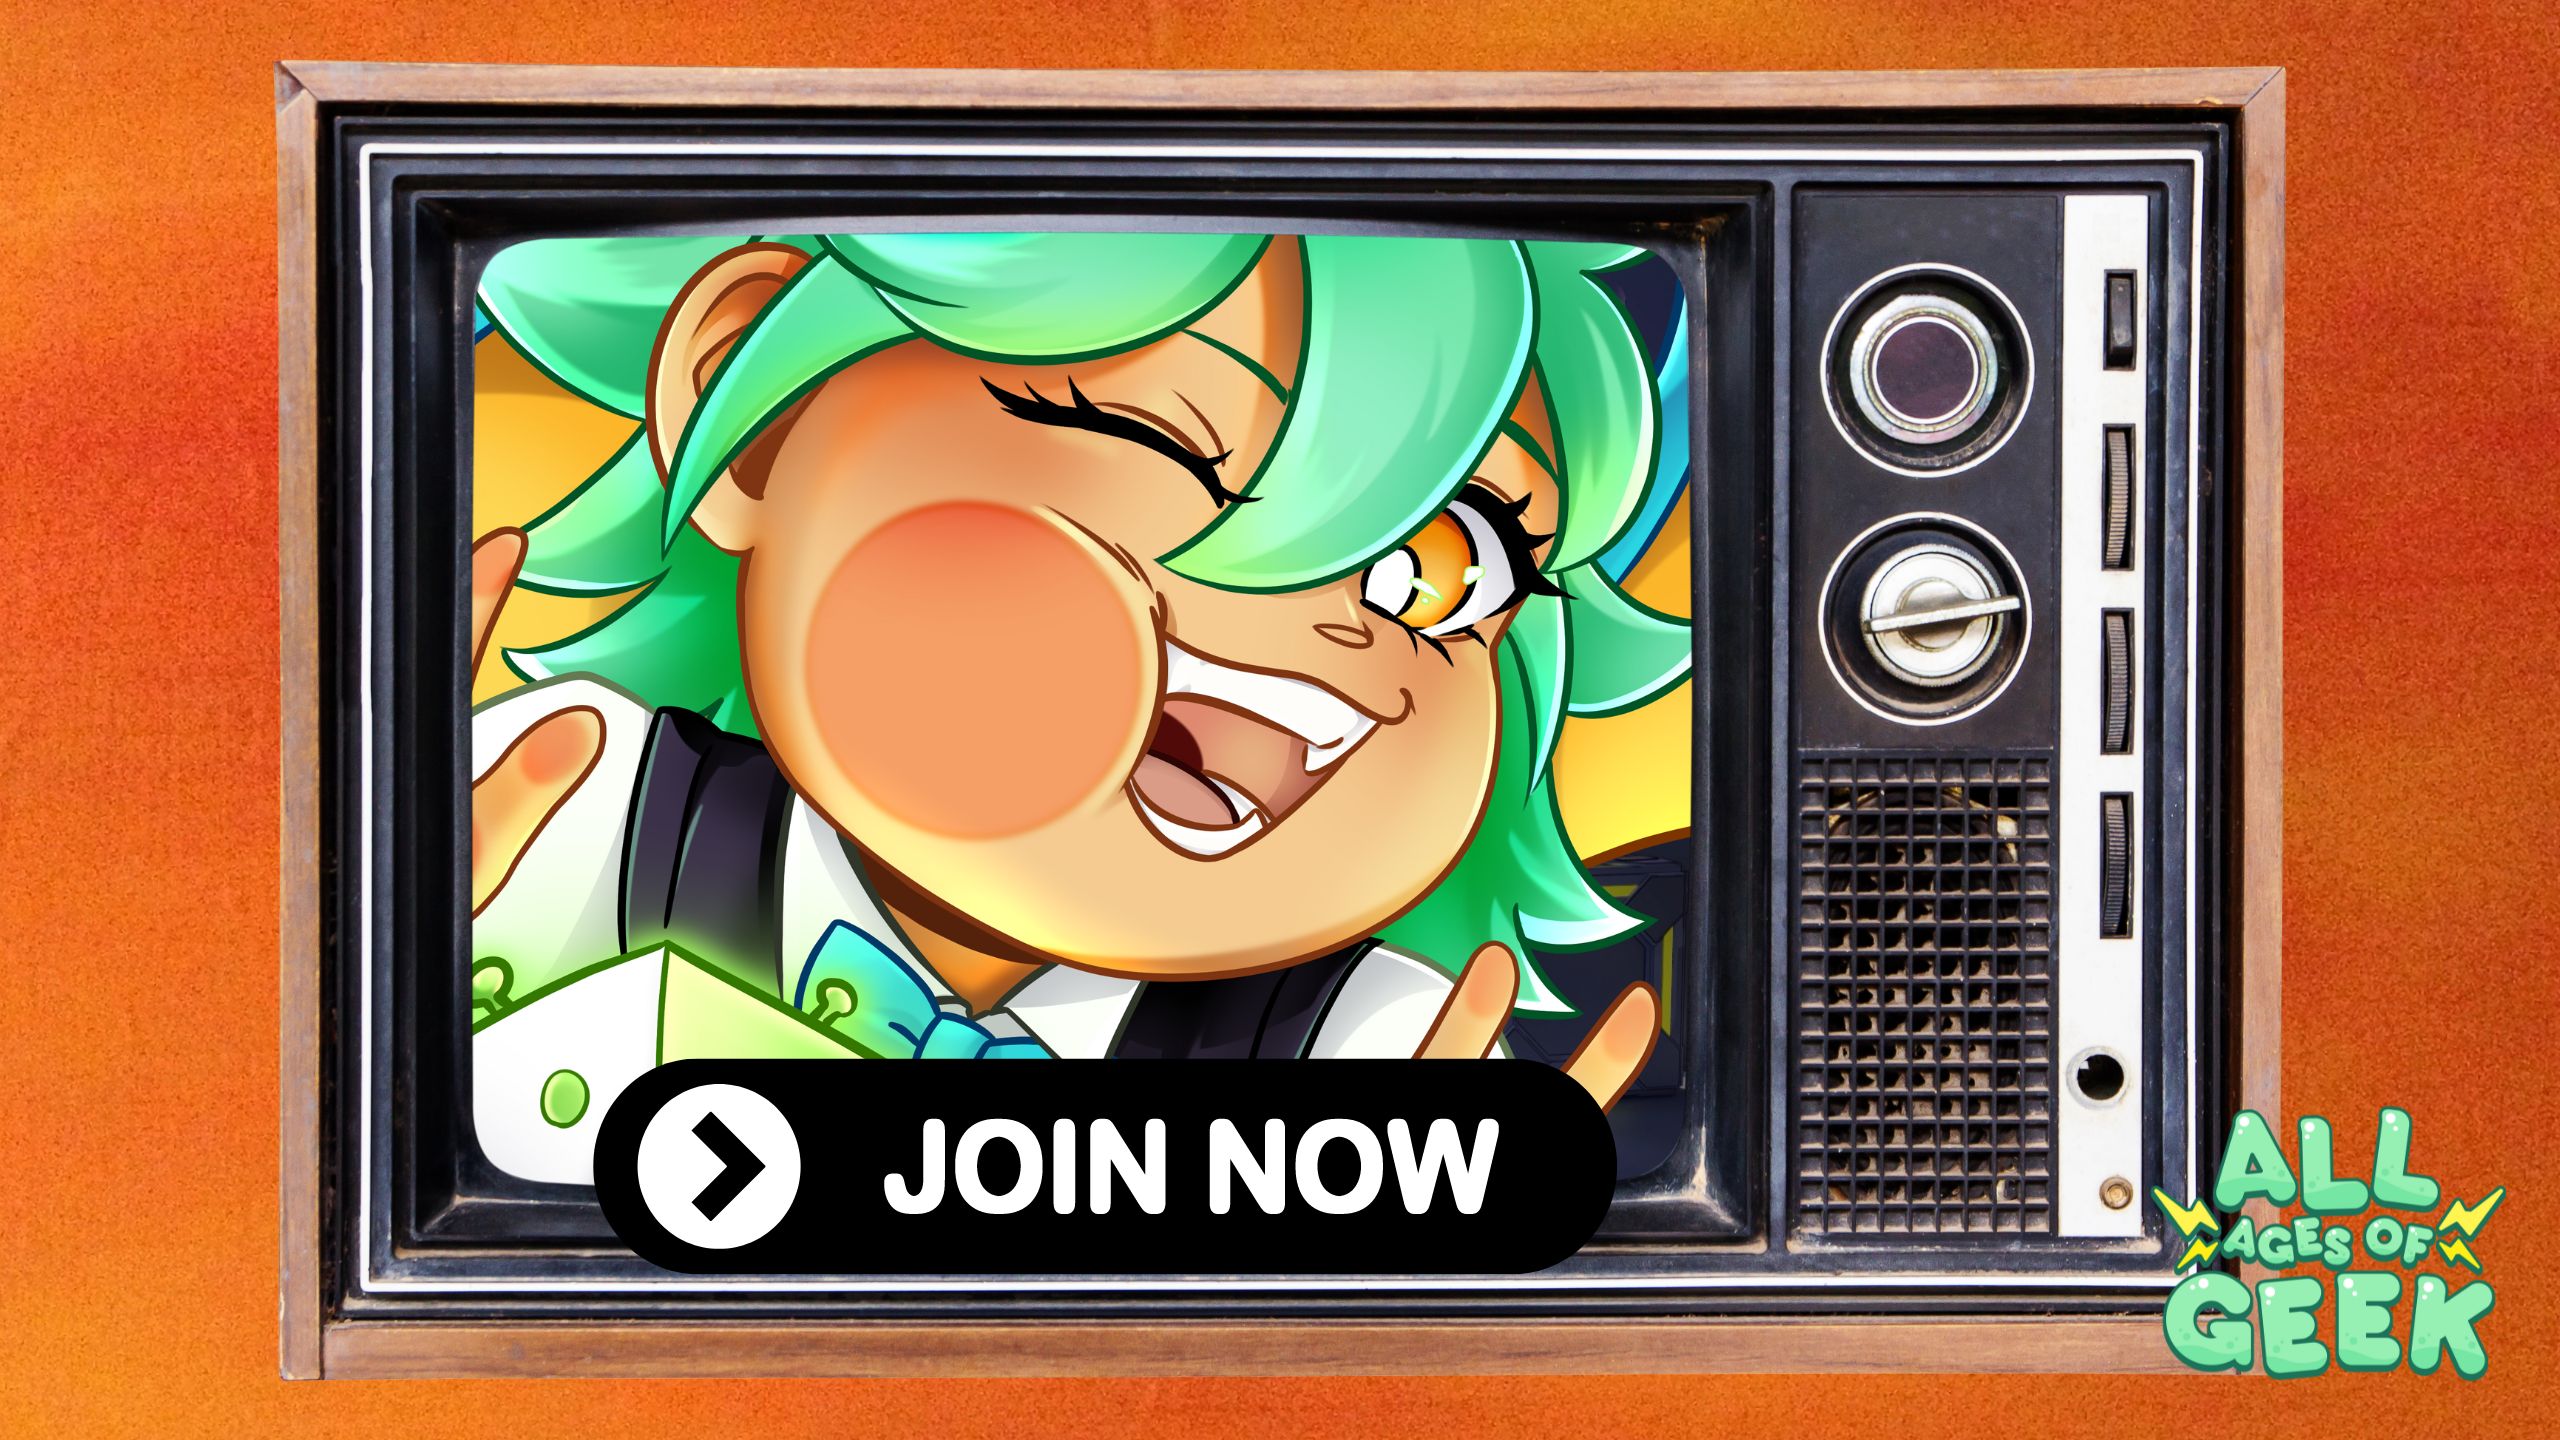 Illustration of a cheerful character with green hair inside an old-fashioned TV screen. The character is smiling and giving a thumbs up. Below the character is a button that says "JOIN NOW". The All Ages of Geek logo is visible in the bottom right corner. The background has a warm orange hue.